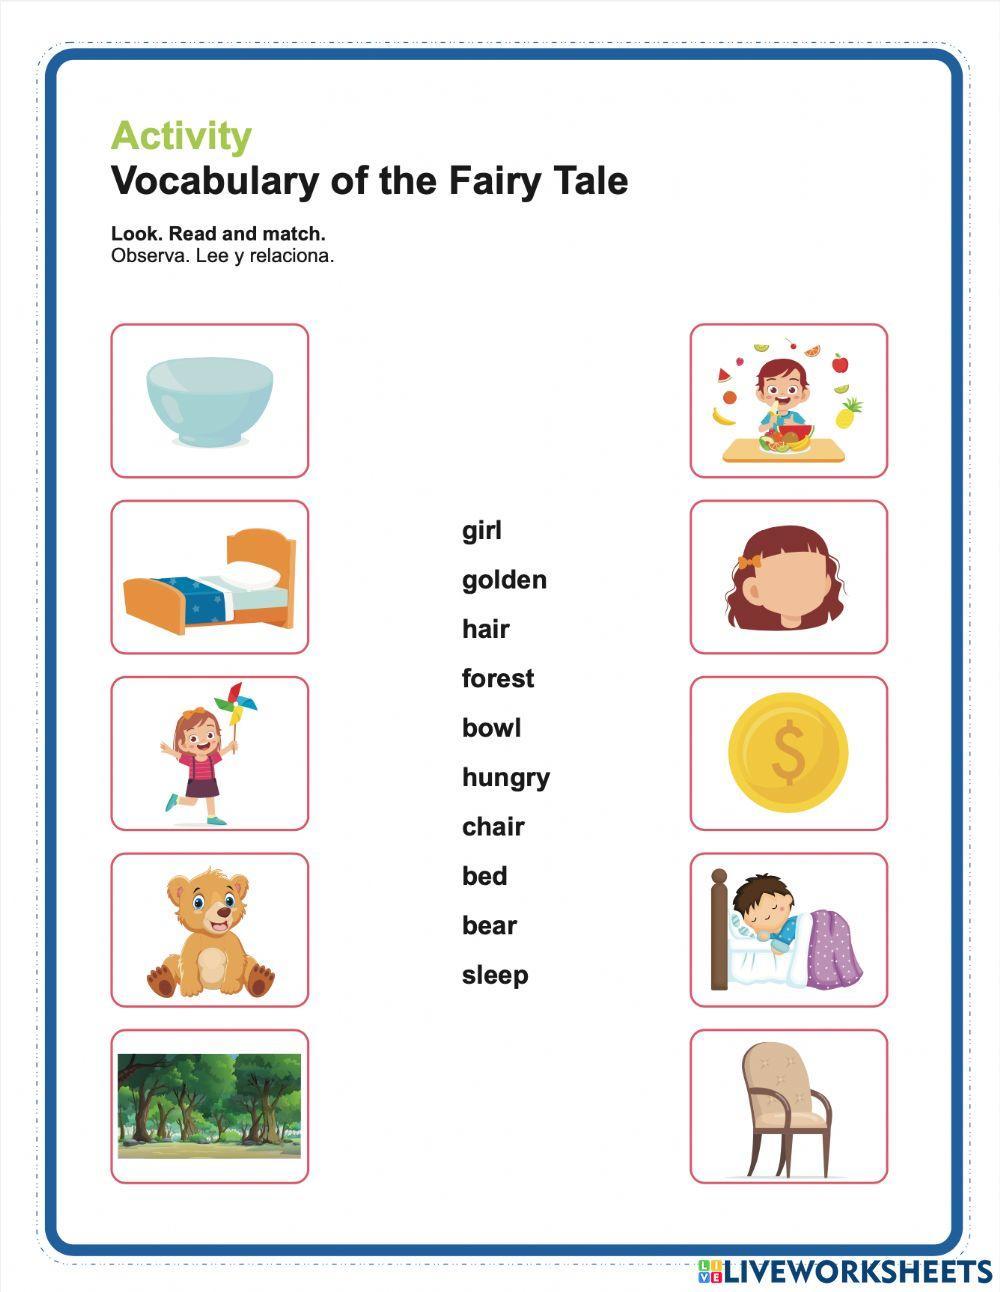 Match vocabulary of a fairy tale